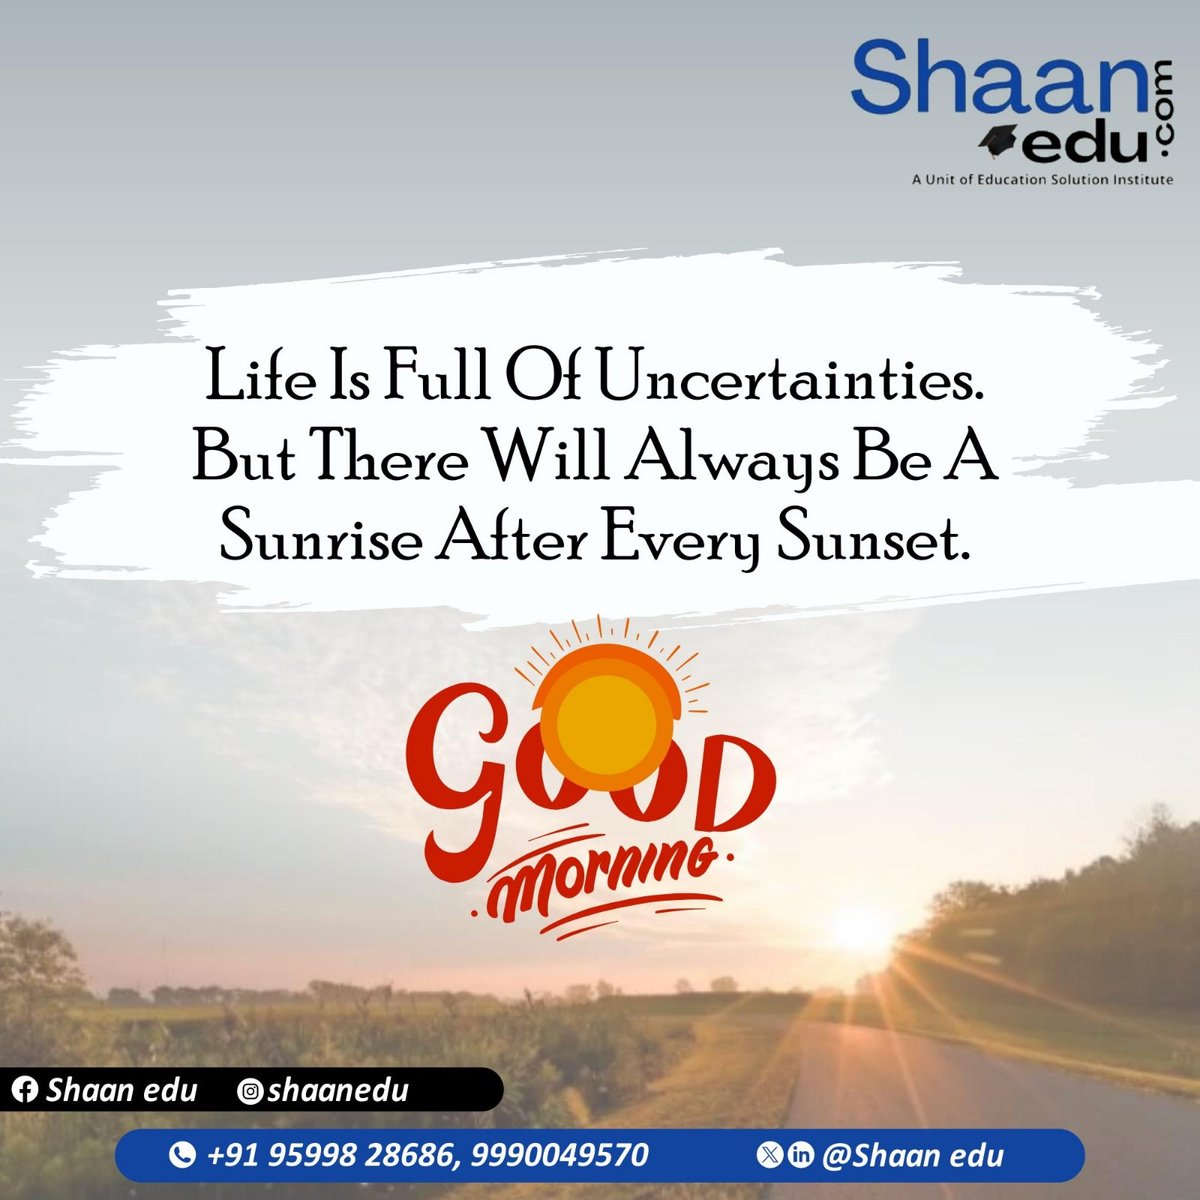 Your Monday morning thoughts set the tone for your whole week. See yourself getting stronger, and living a fulfilling, happier and healthier life. #MotivationalQuotes #staymotivated #Studentslife #shaanedu #mondaymotivation